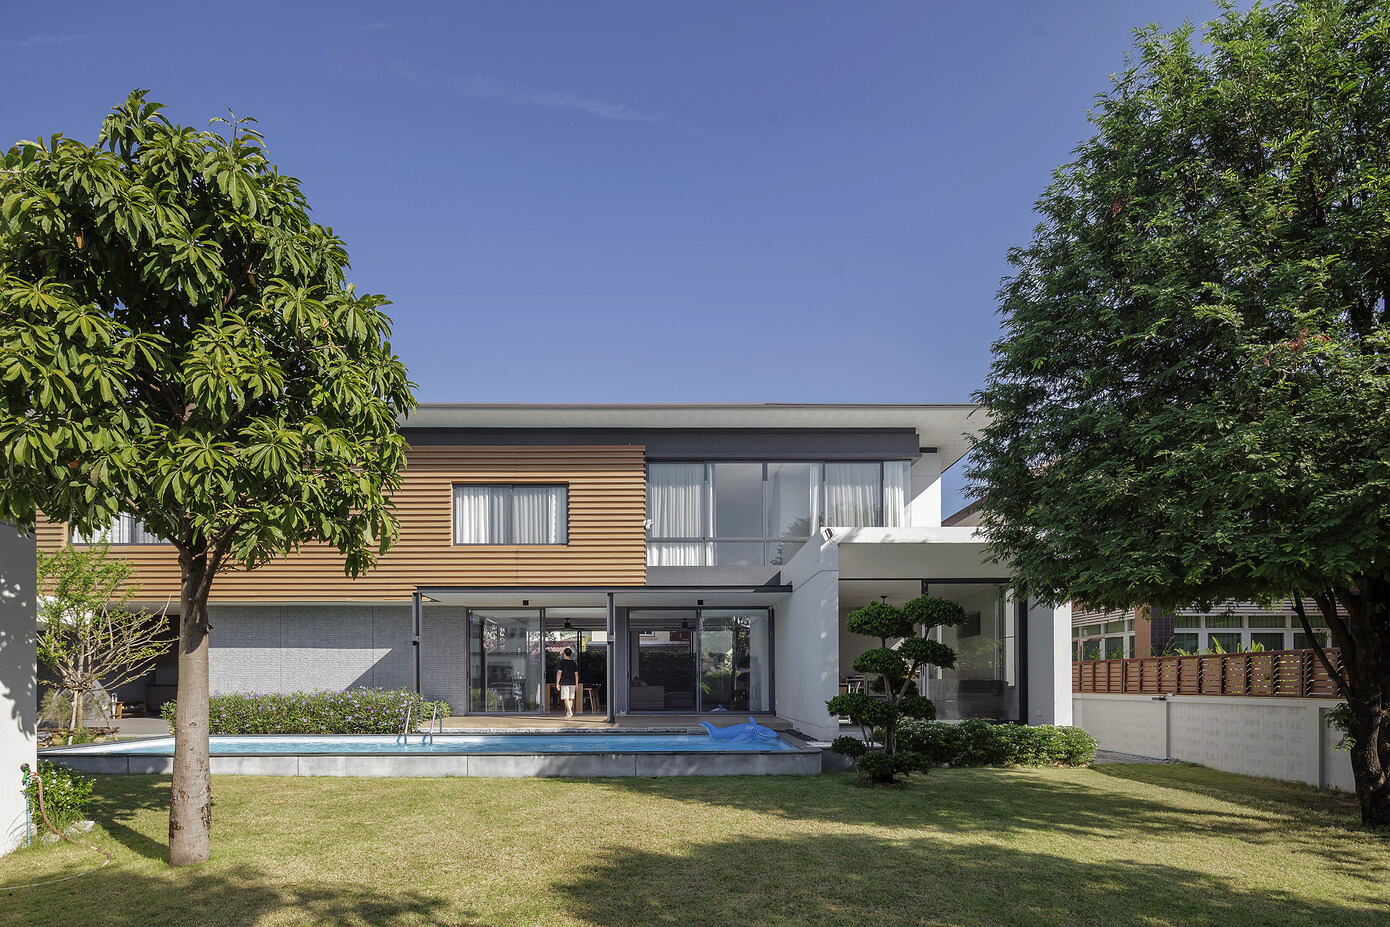 The WCRP House: Where Thai Tradition Meets Modern Design Elements